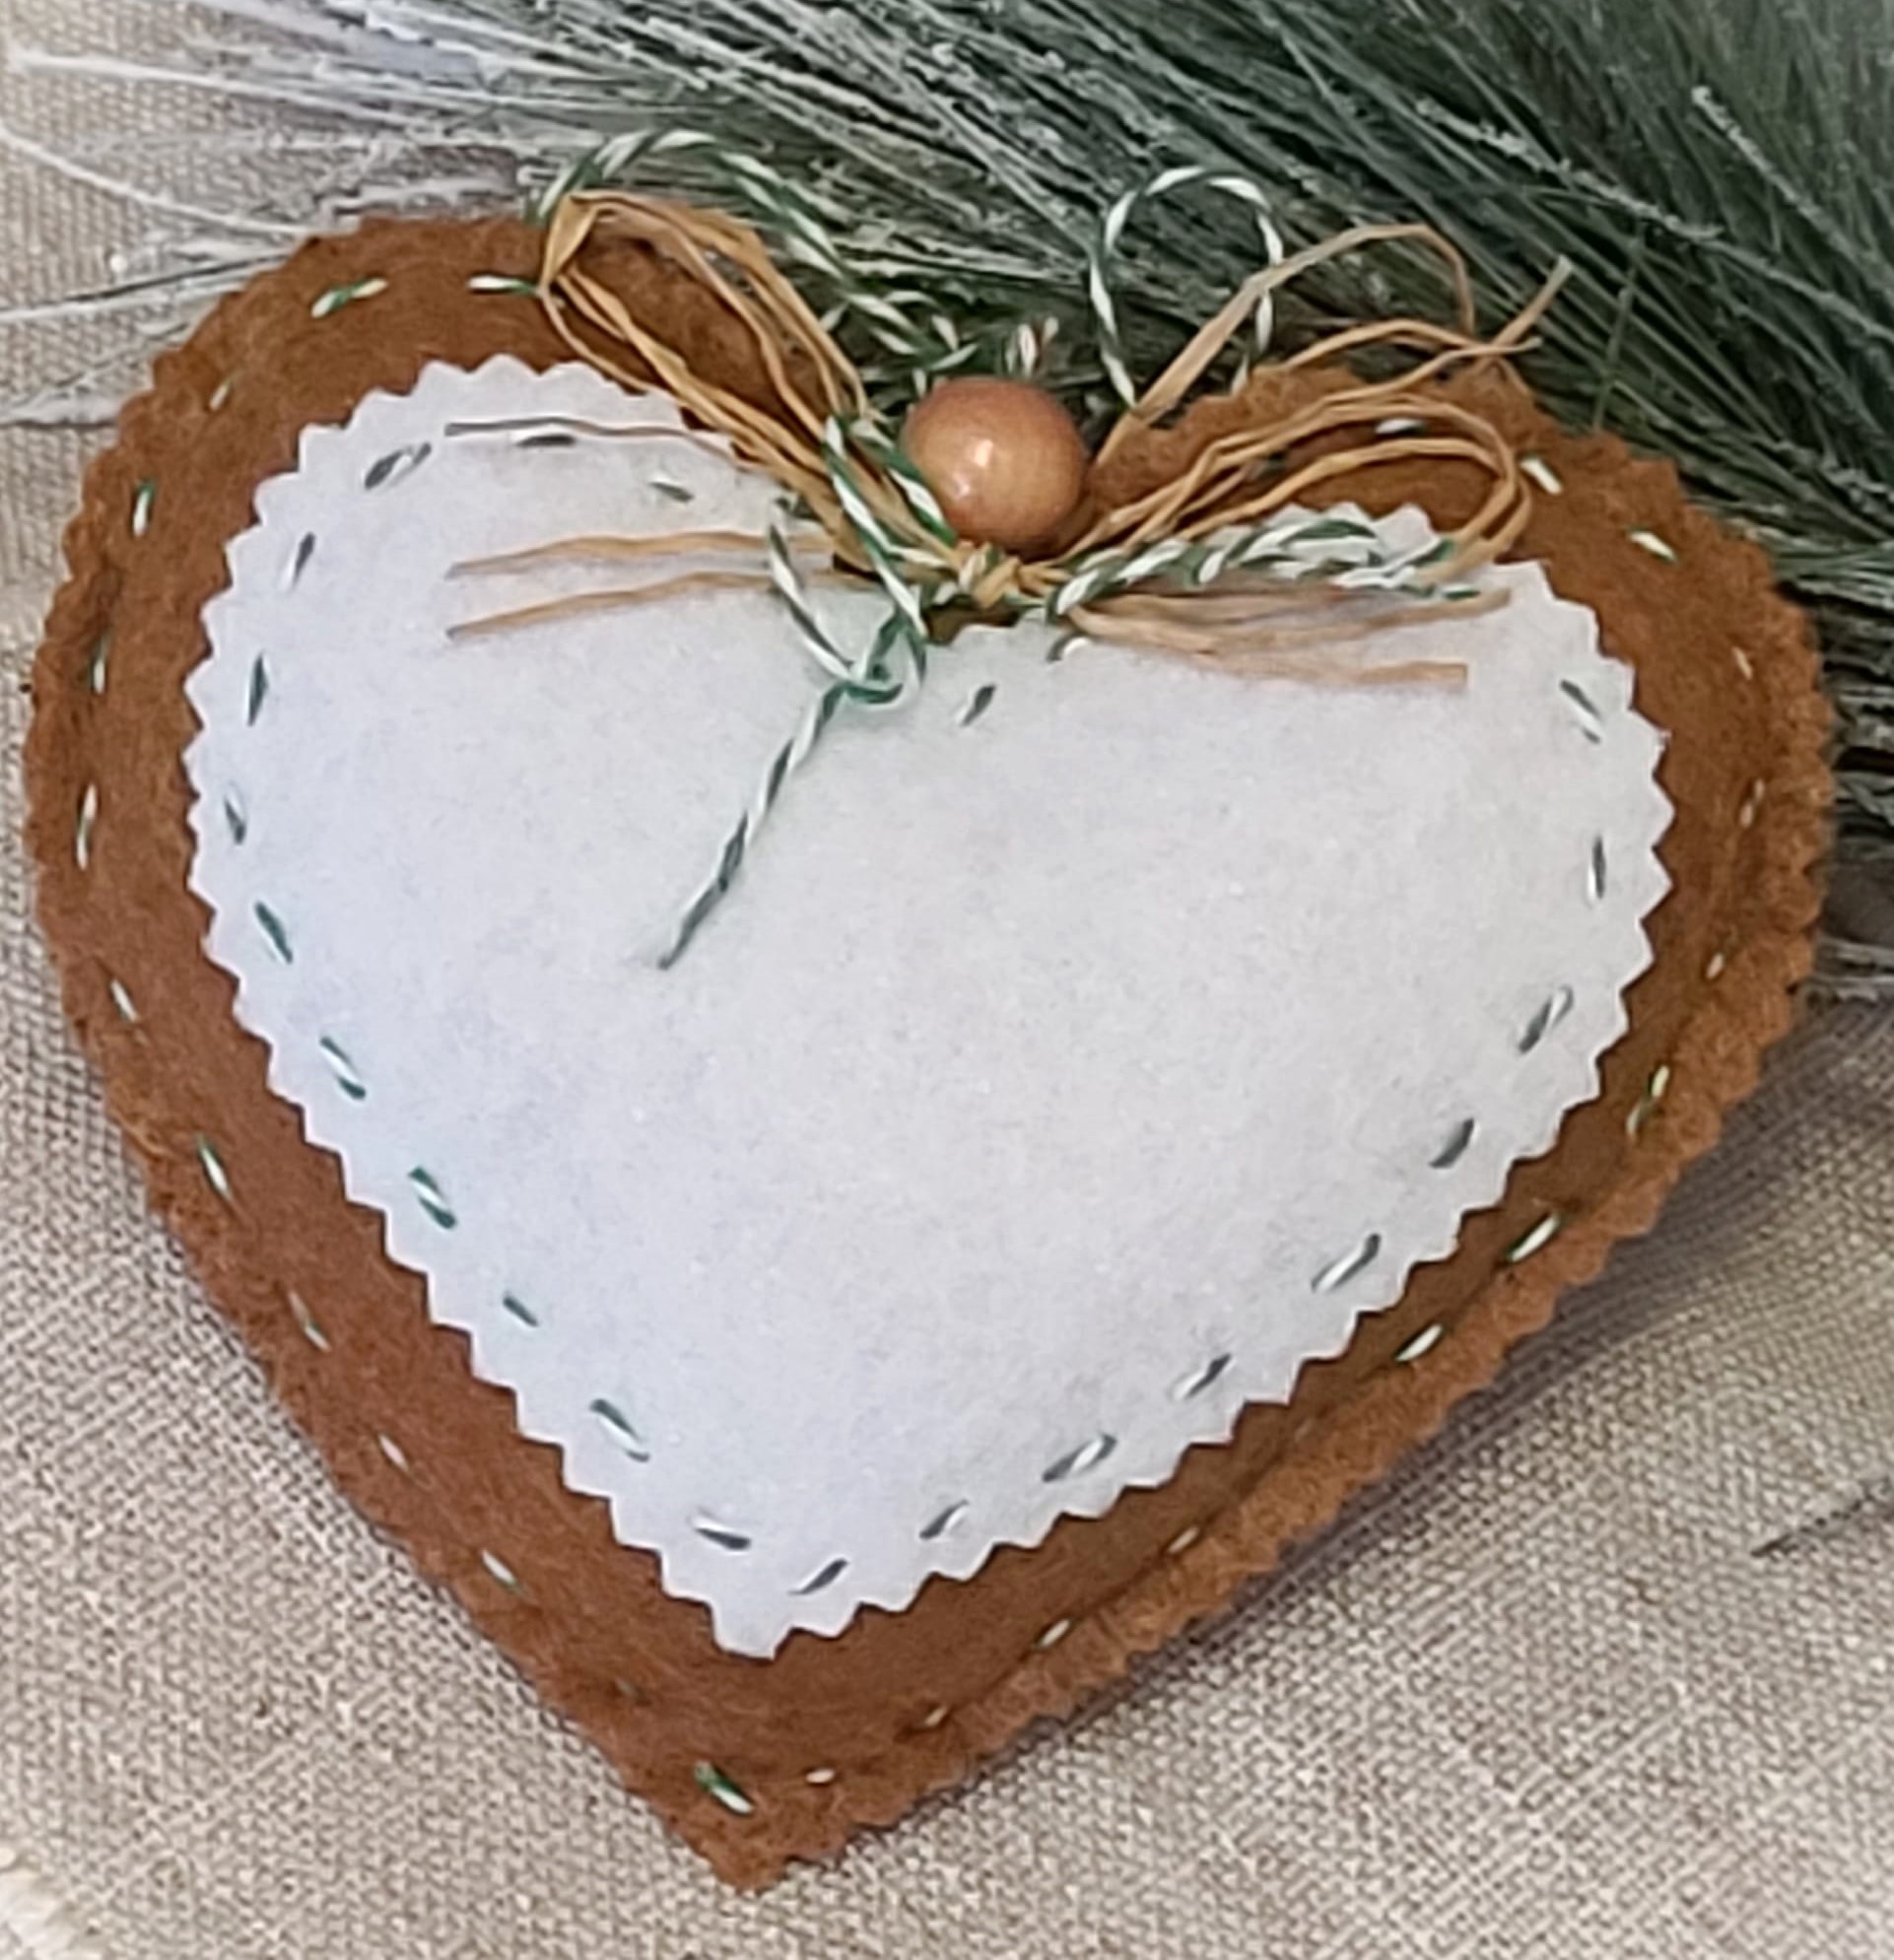 Gingerbread felt and embroiddery PEACE heart ornament - GREEN